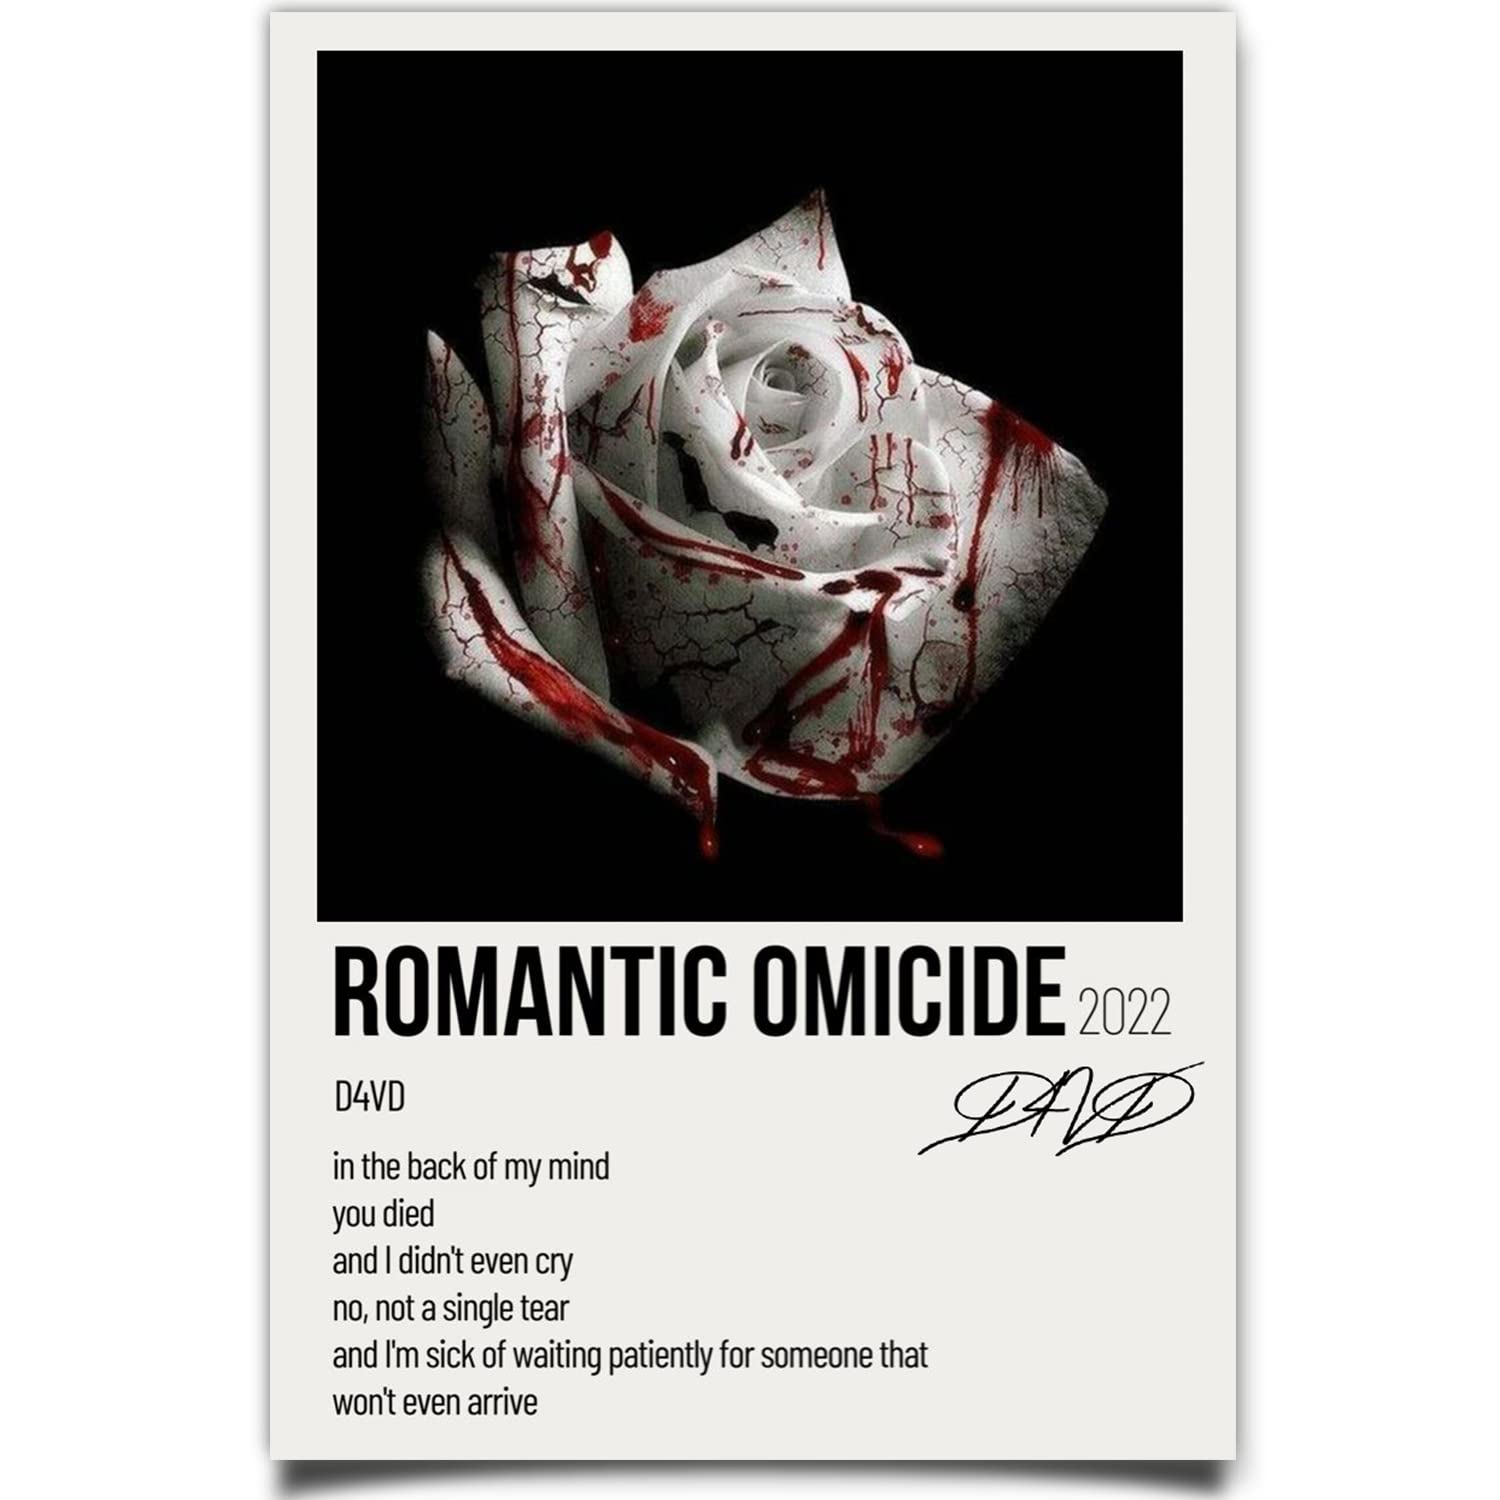 R Timer D4vd Poster Romantic Homicide Music Poster Album Cover Poster Decorations Paintings Retro Poster Canvas Wall Art For Living Room Bedroom Gift Unframed (12x18inch(30x45cm)): Posters & Prints